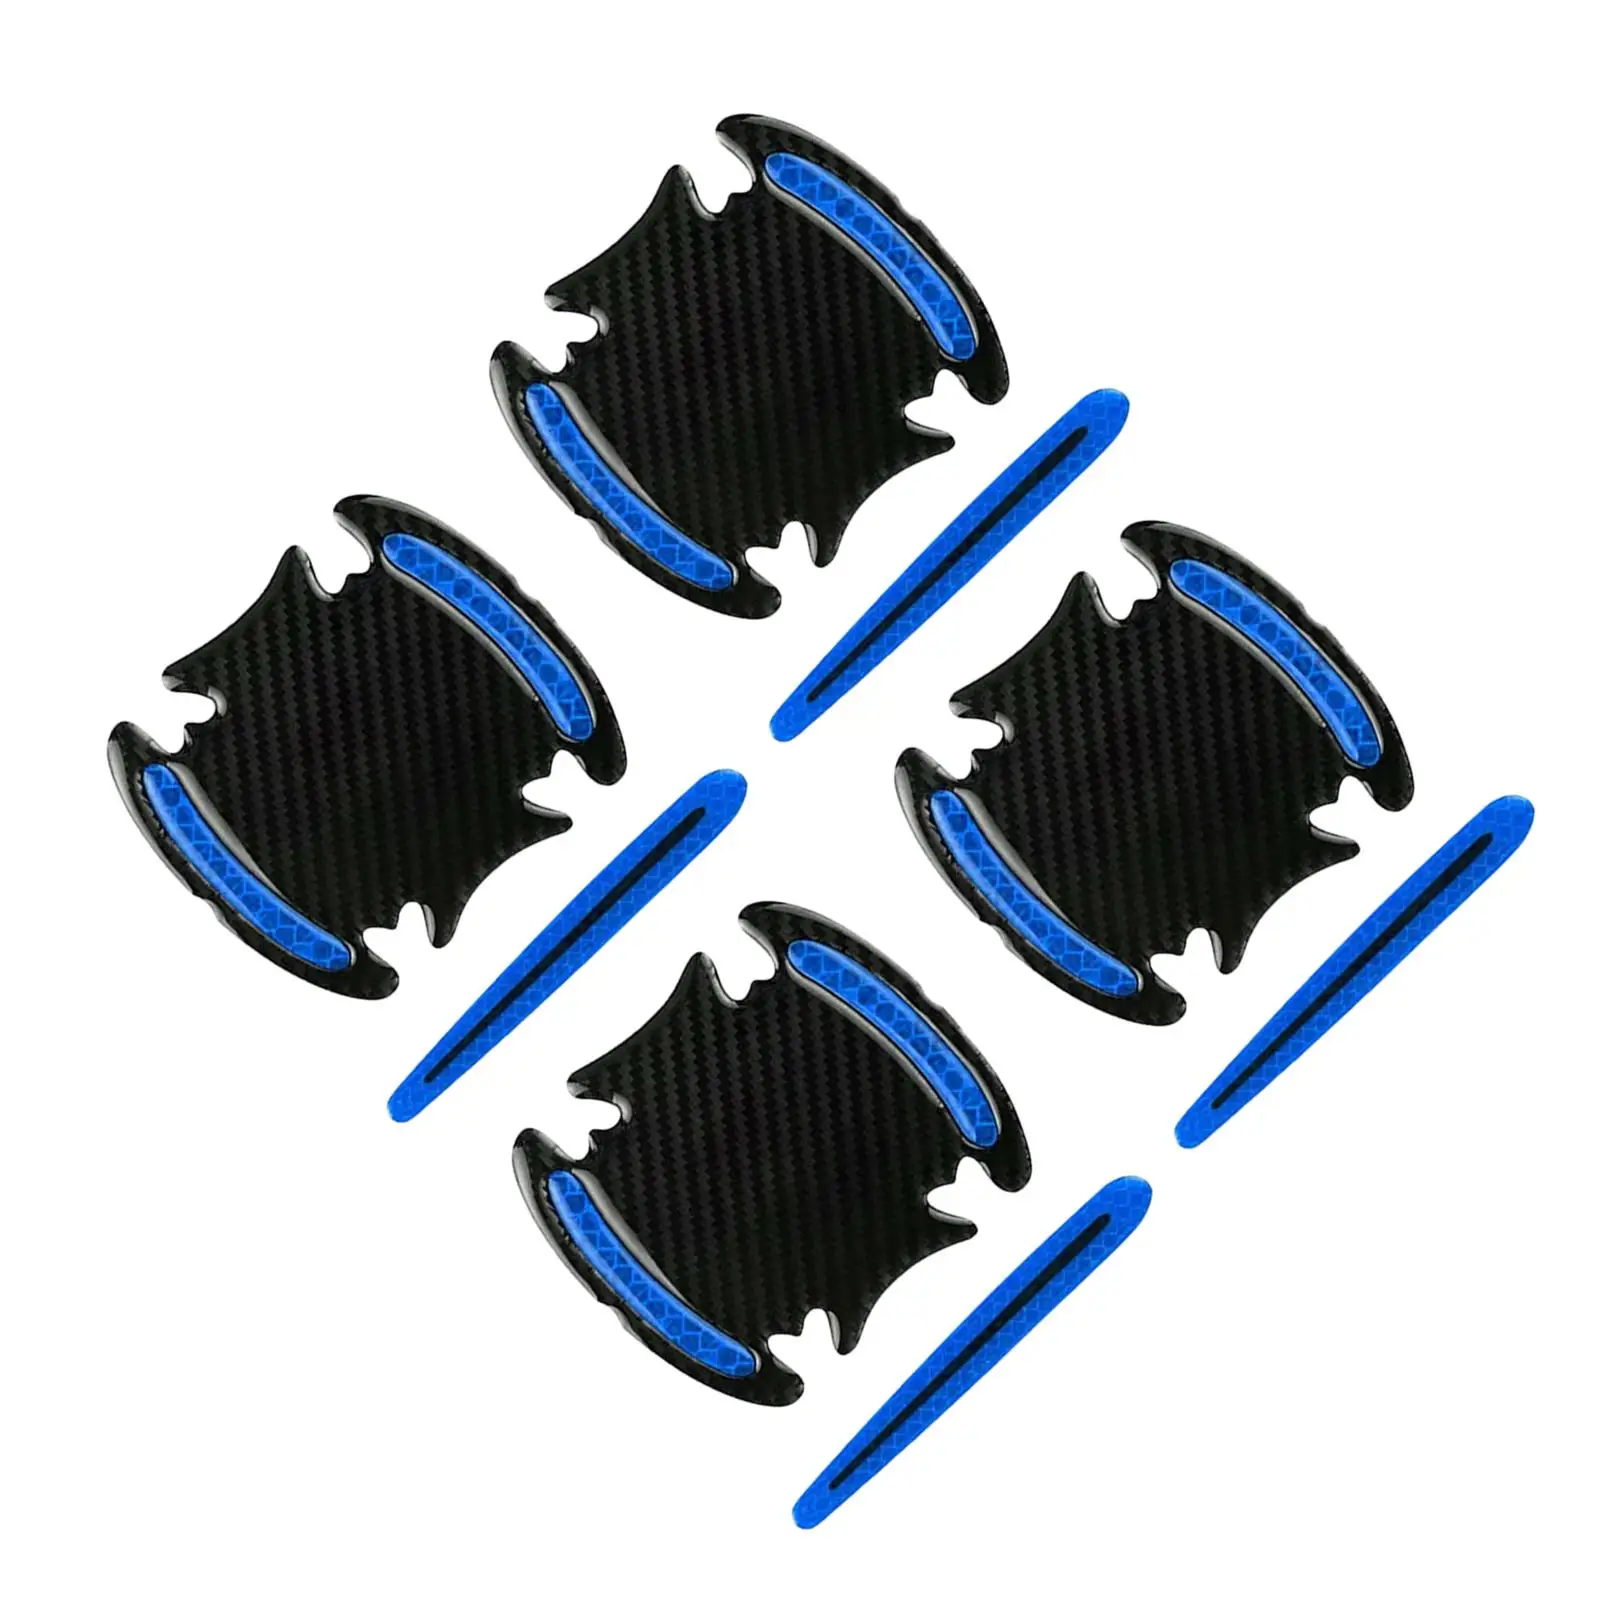 8 Pieces Car Door Handle Scratch Protector Reflective Strips Stickers Automotive Accessories Protective Films Paint Protection